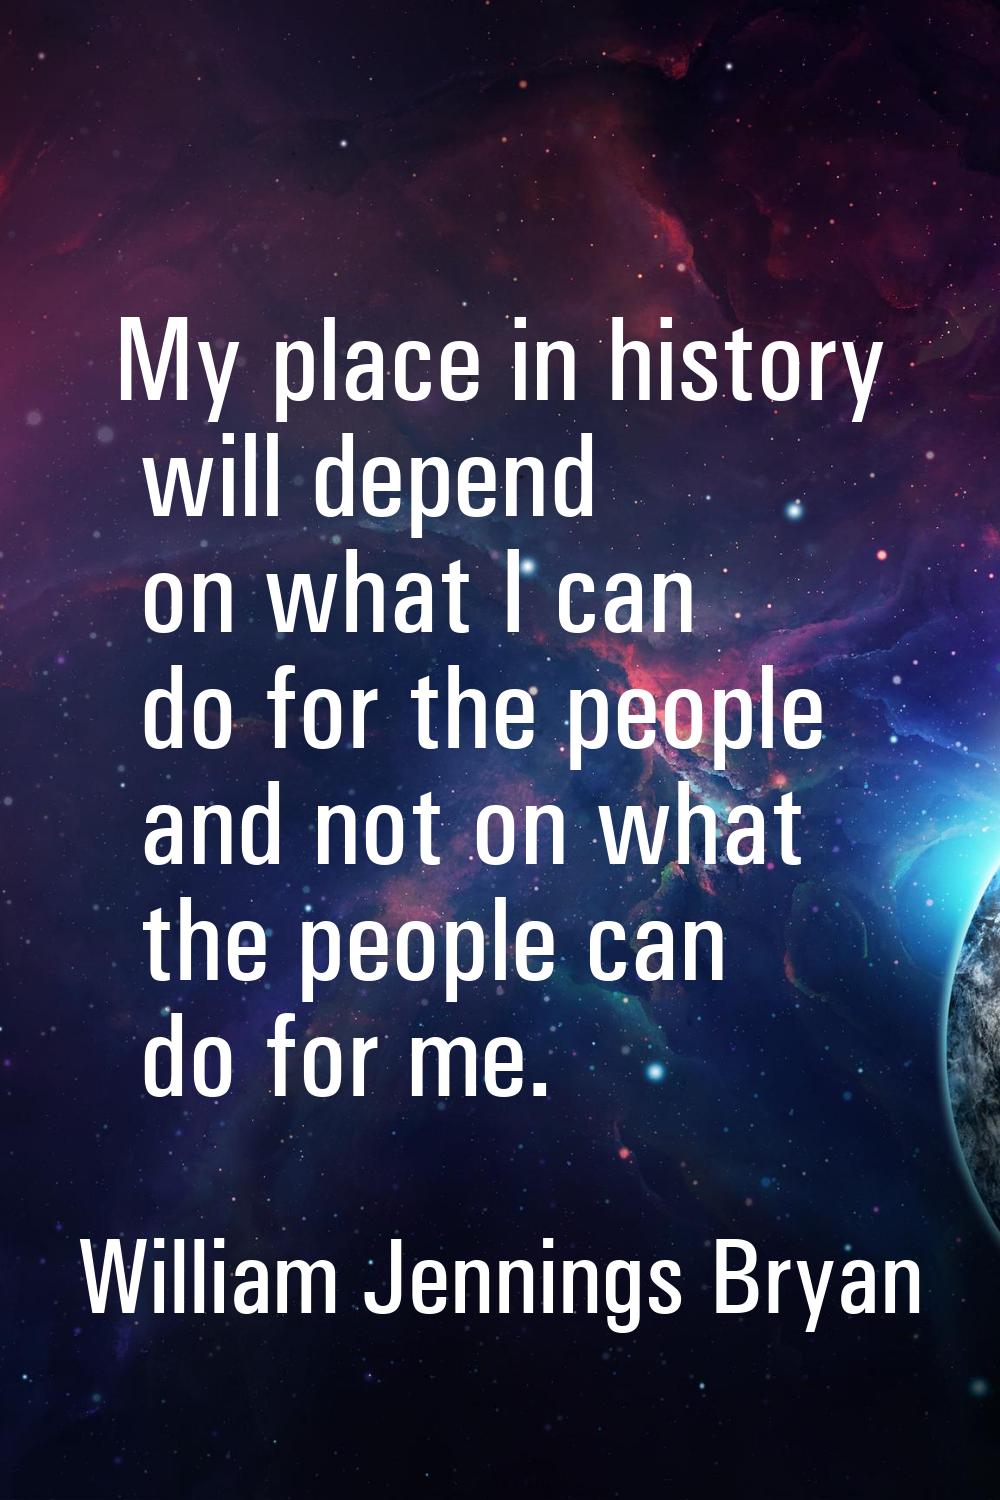 My place in history will depend on what I can do for the people and not on what the people can do f